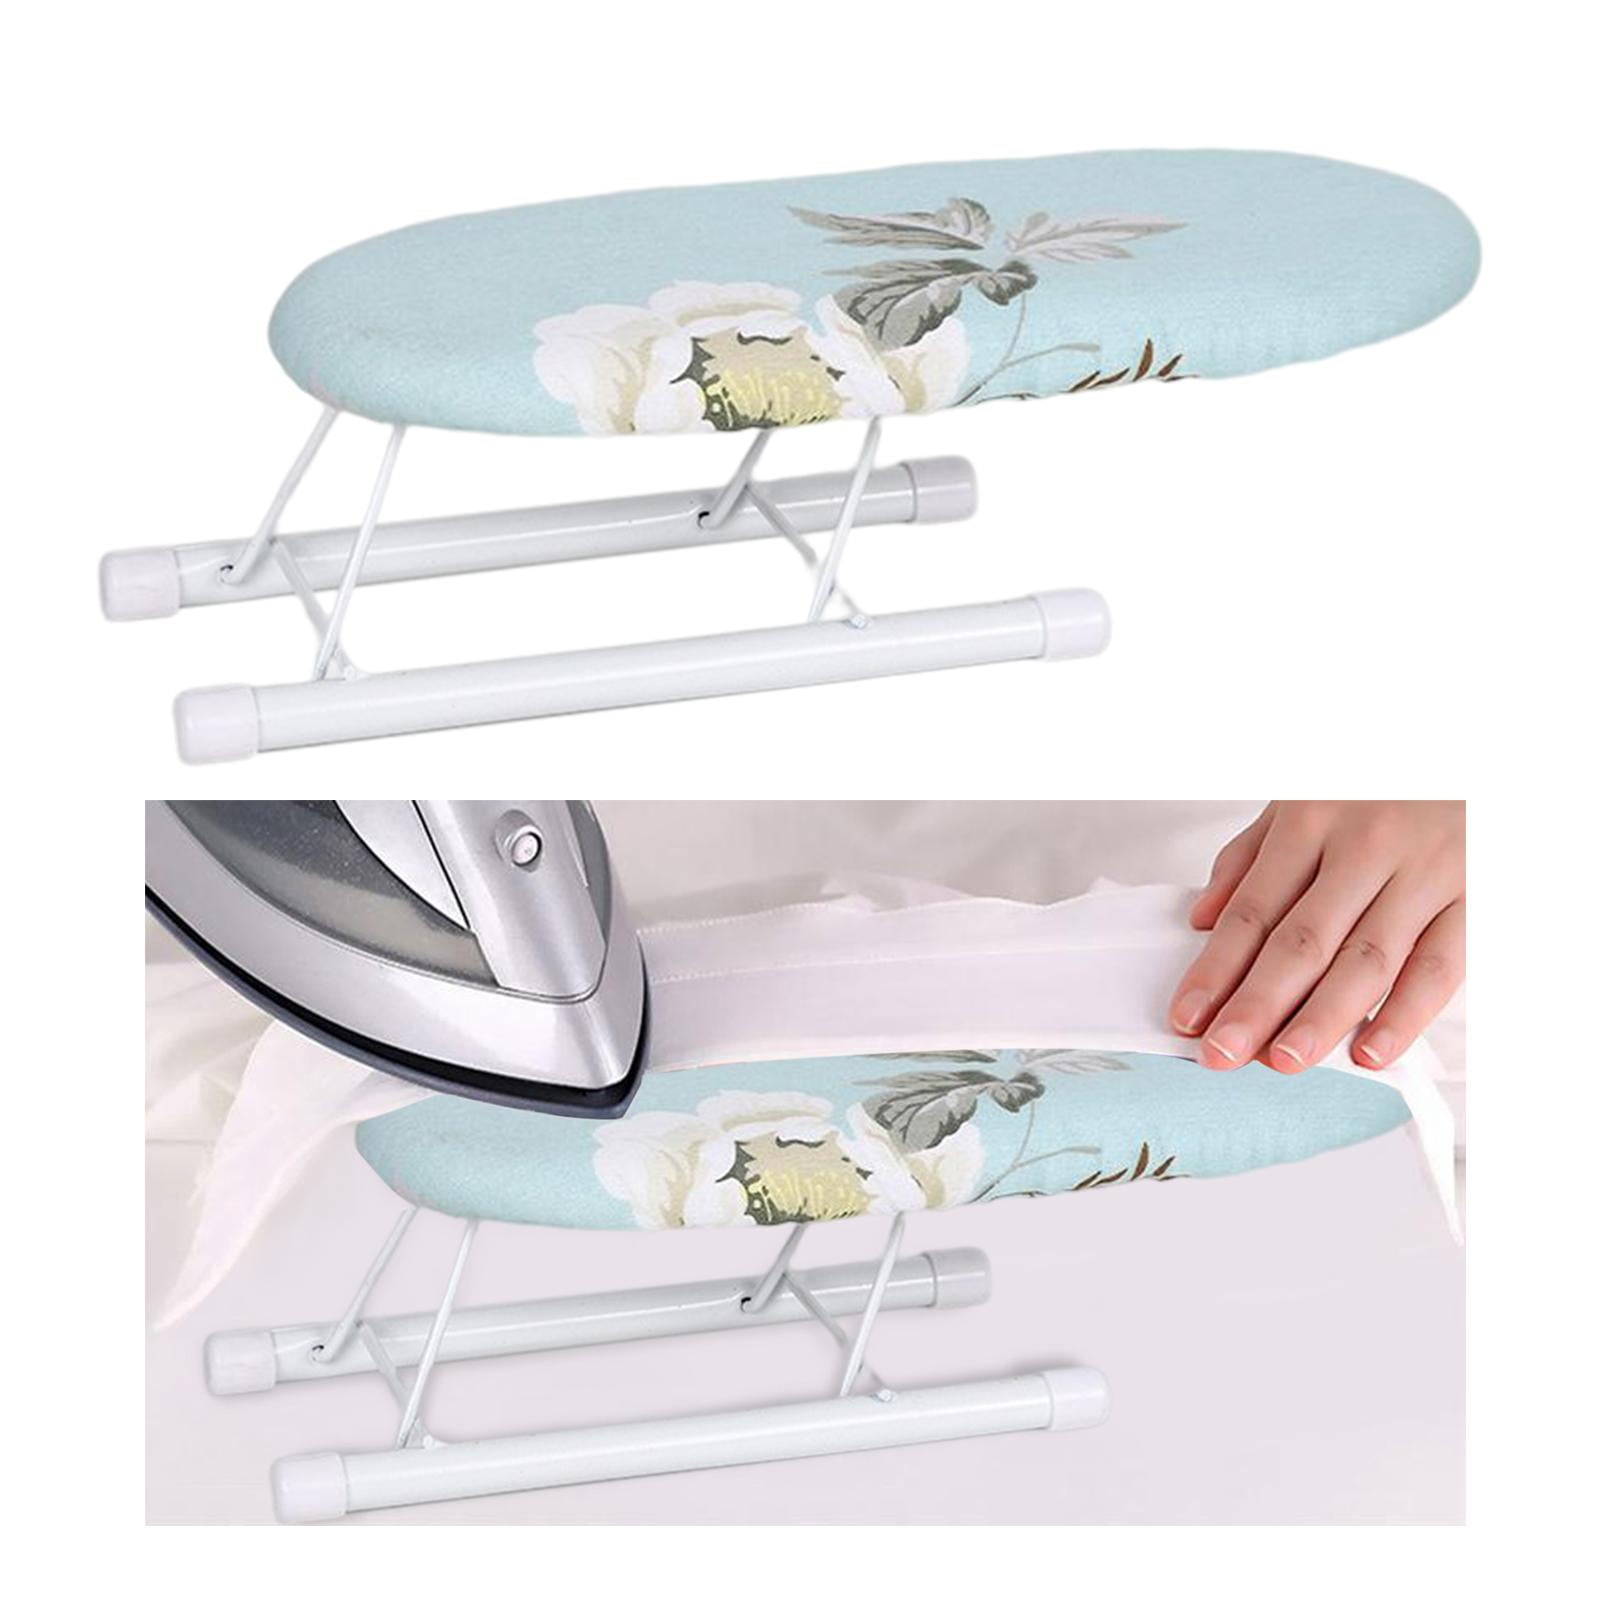 Small Tabletop Ironing Board - Ironing Board with Mesh Metal Base & Cover,  Portable Folding Mini Iron Board for Sewing, Craft Room, Household, Dorm ,  Light Blue 